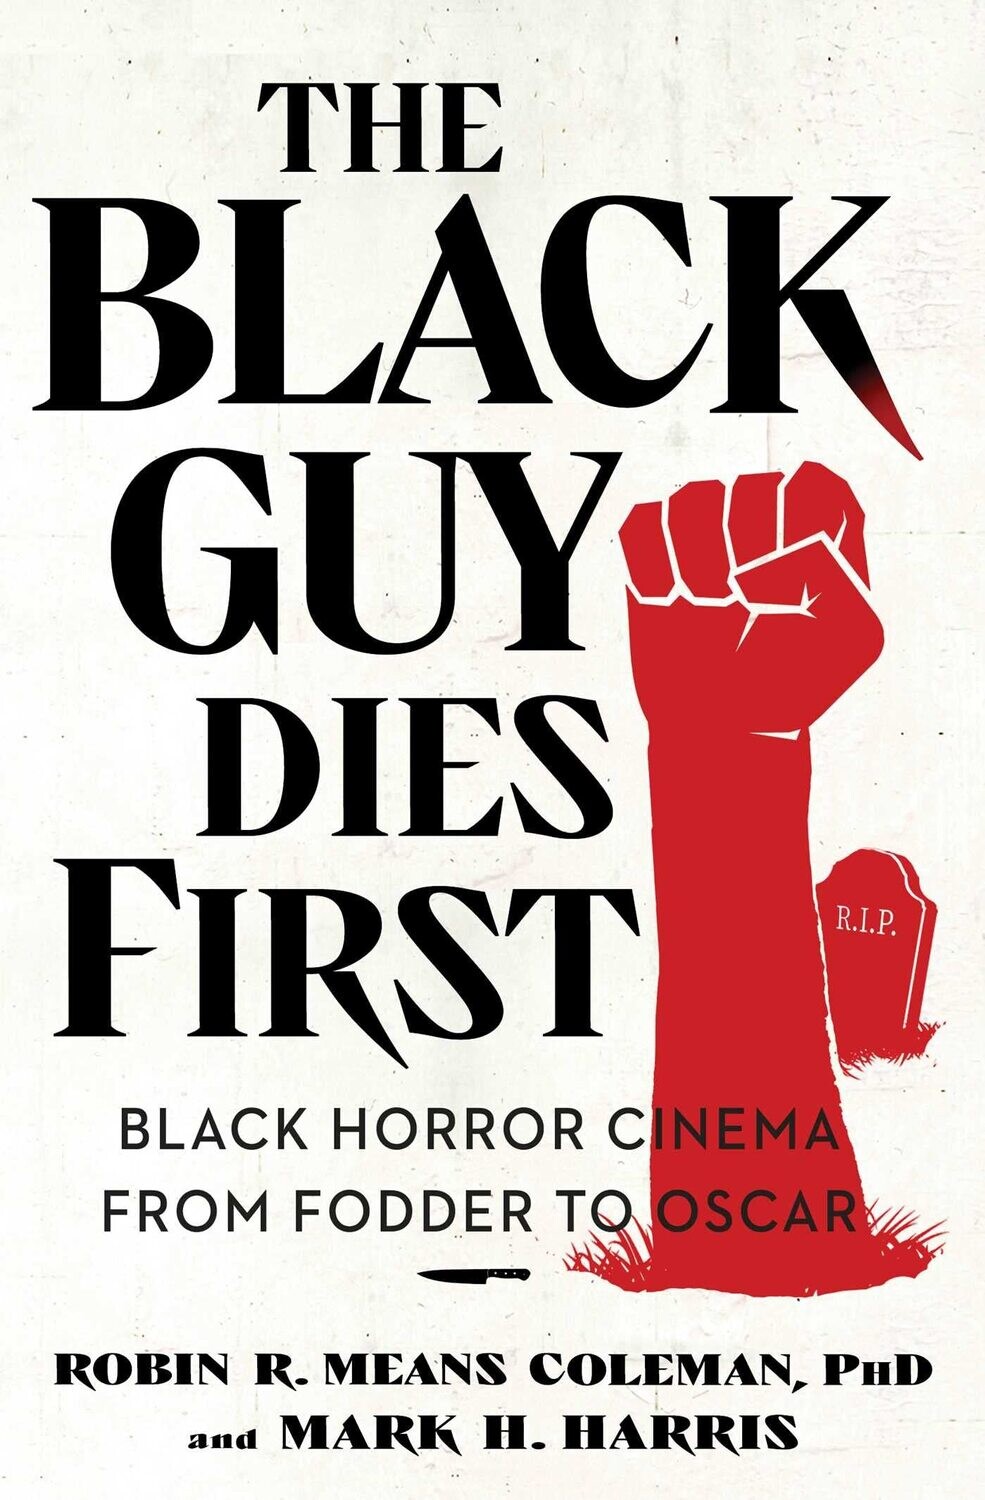 The Black Guy Dies First: Black Horror Cinema from Fodder to Oscar (Paperback, NEW)